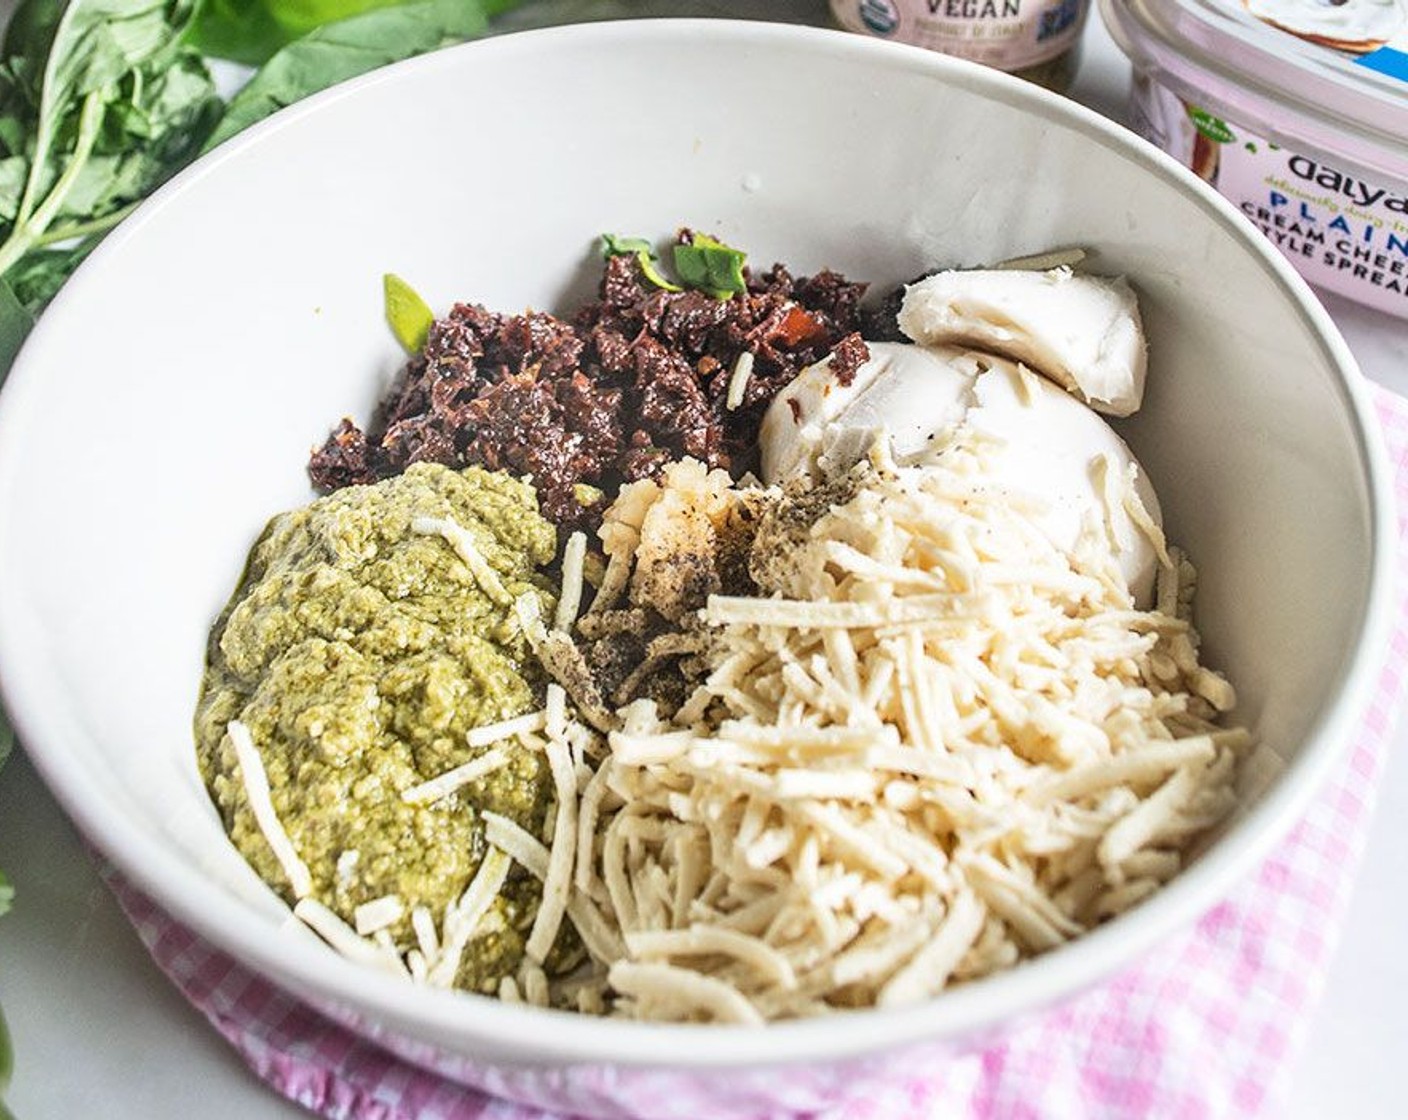 step 1 To a medium bowl, add Vegan Cream Cheese (8 oz), Vegan Mozzarella Cheese (1 cup), Sun-Dried Tomatoes in Olive Oil (2/3 cup), Vegan Basil Pesto (1/2 cup), Pecans (1/2 cup), Garlic (1 tsp), and Ground Black Pepper (1/2 tsp). Stir until well combined.